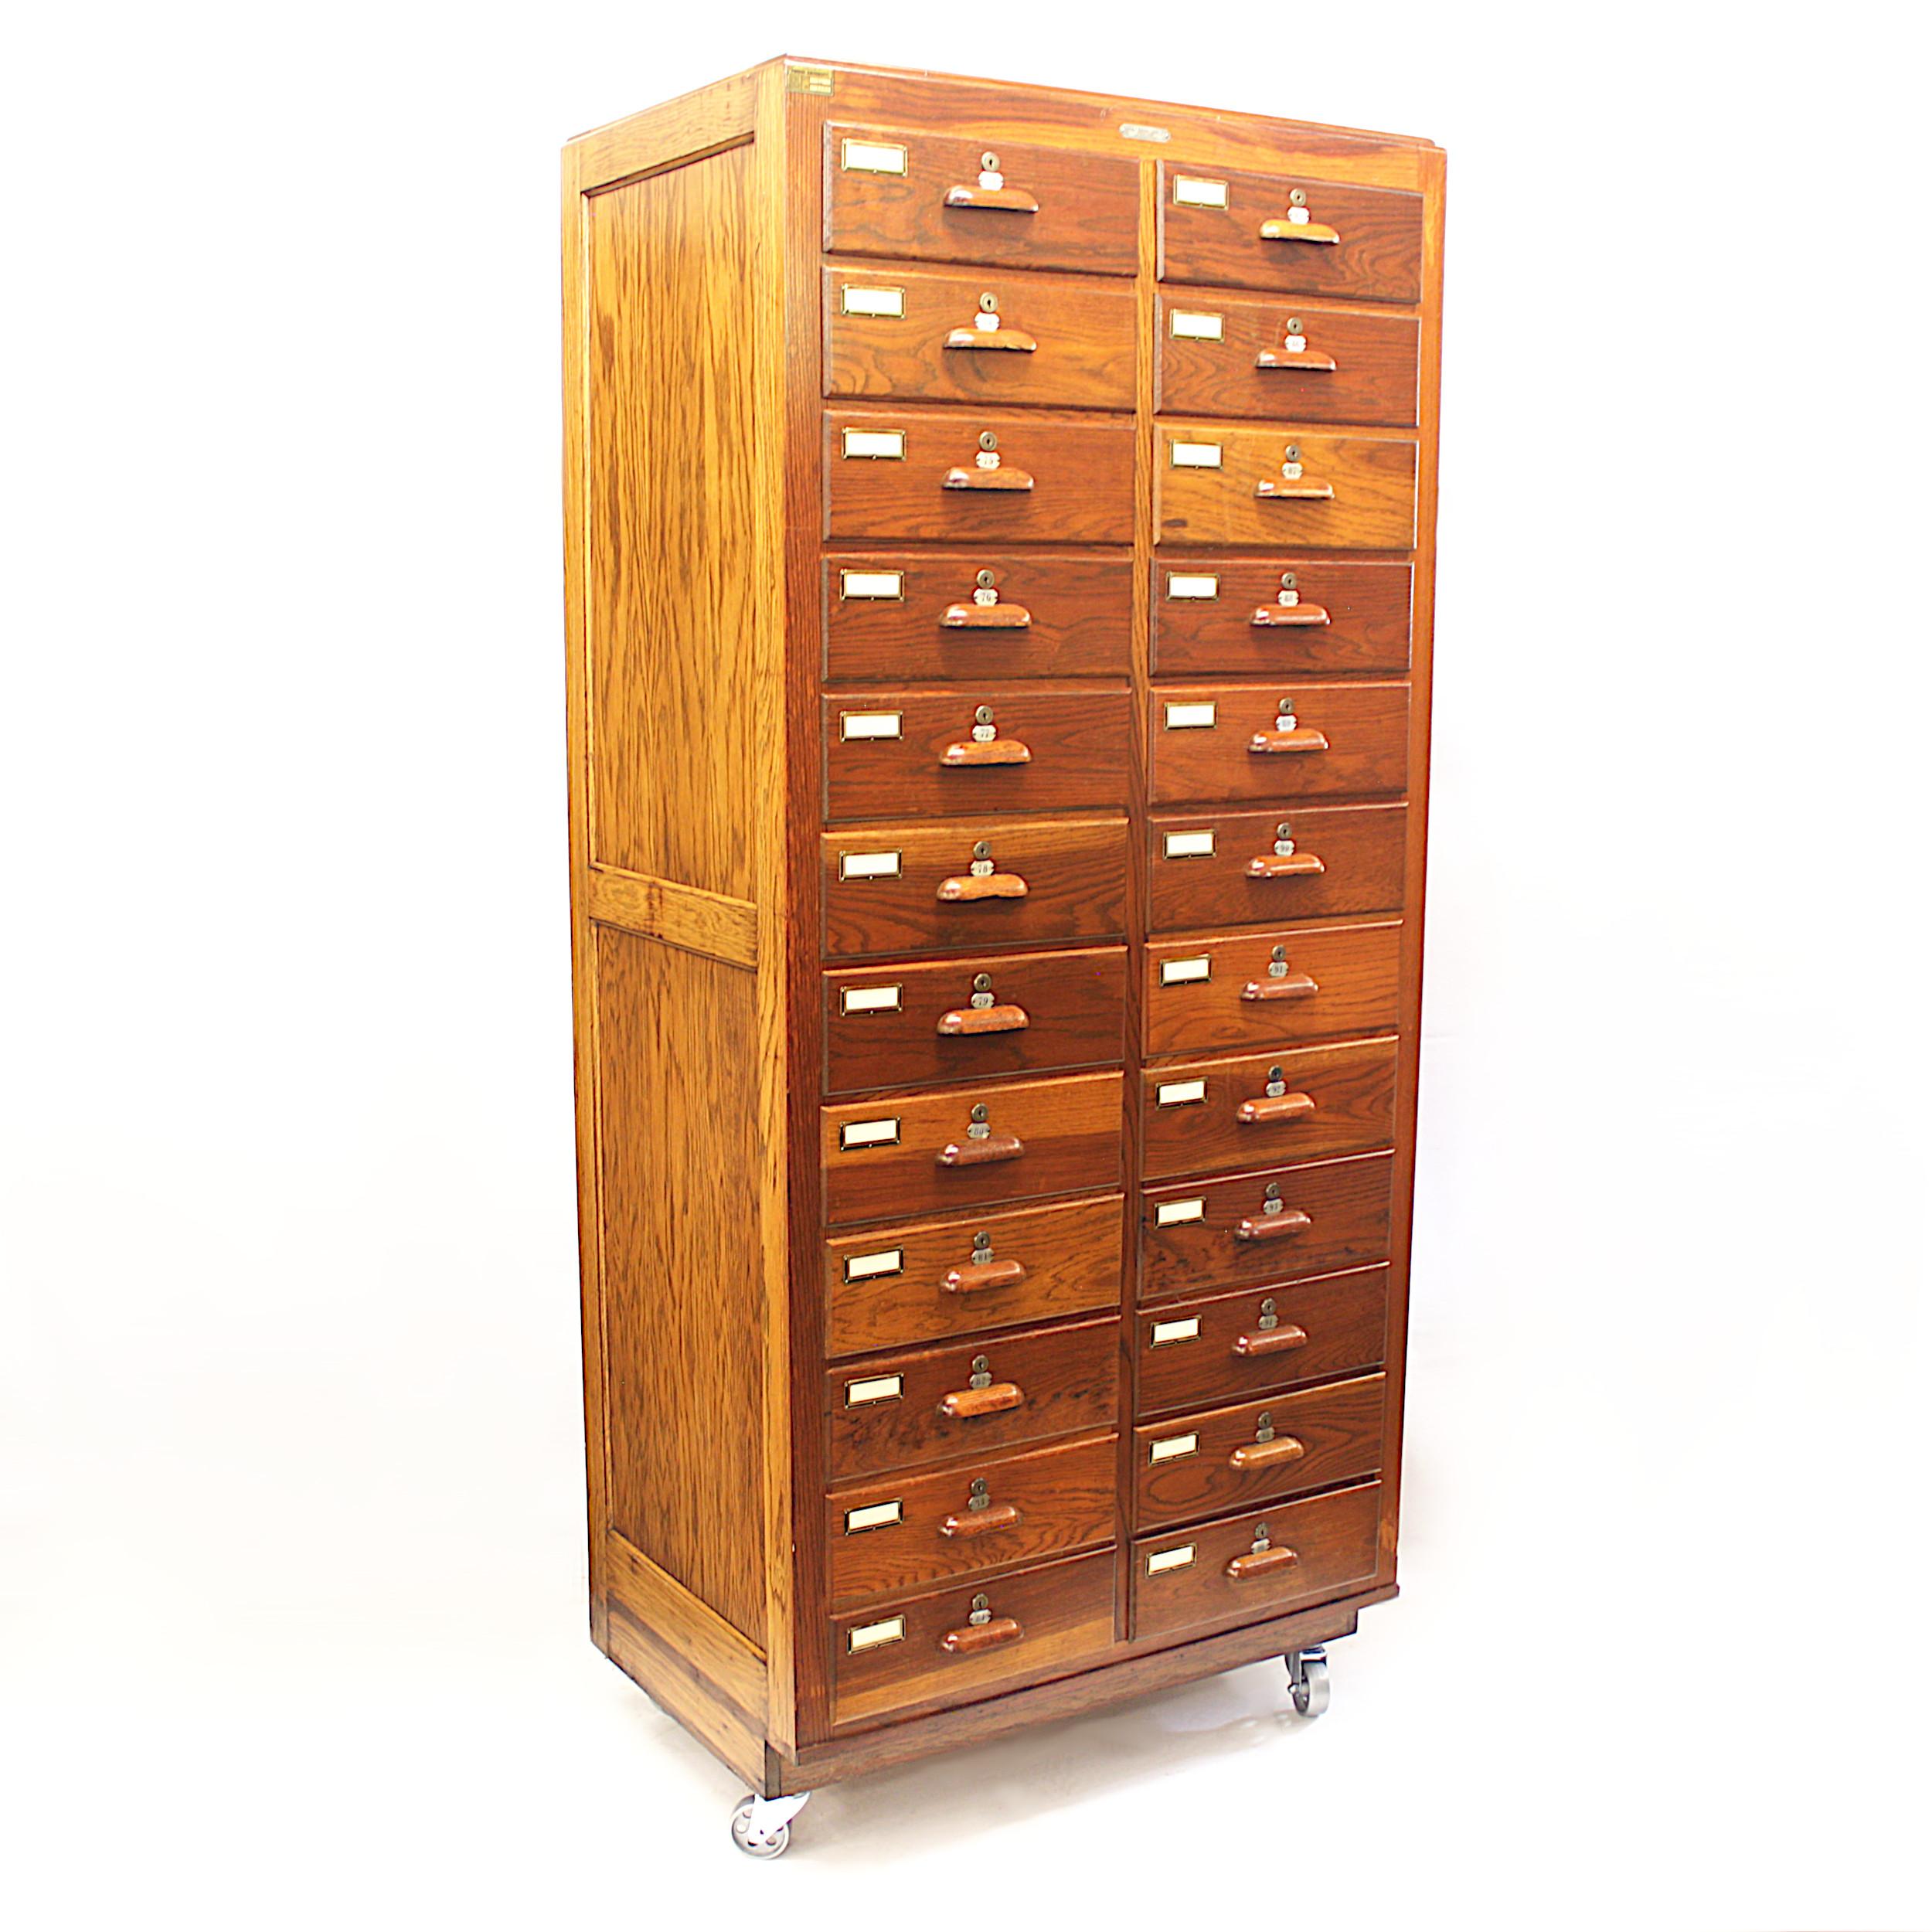 Wonderful vintage 1940s oak cabinet by the Walrus Manufacturing Co. Cabinet features:

- 24 dovetailed drawers with locks
- Solid oak construction
- Paneled sides
- Metal-tag numbered drawers
- Four steel wheel casters

With its impressive